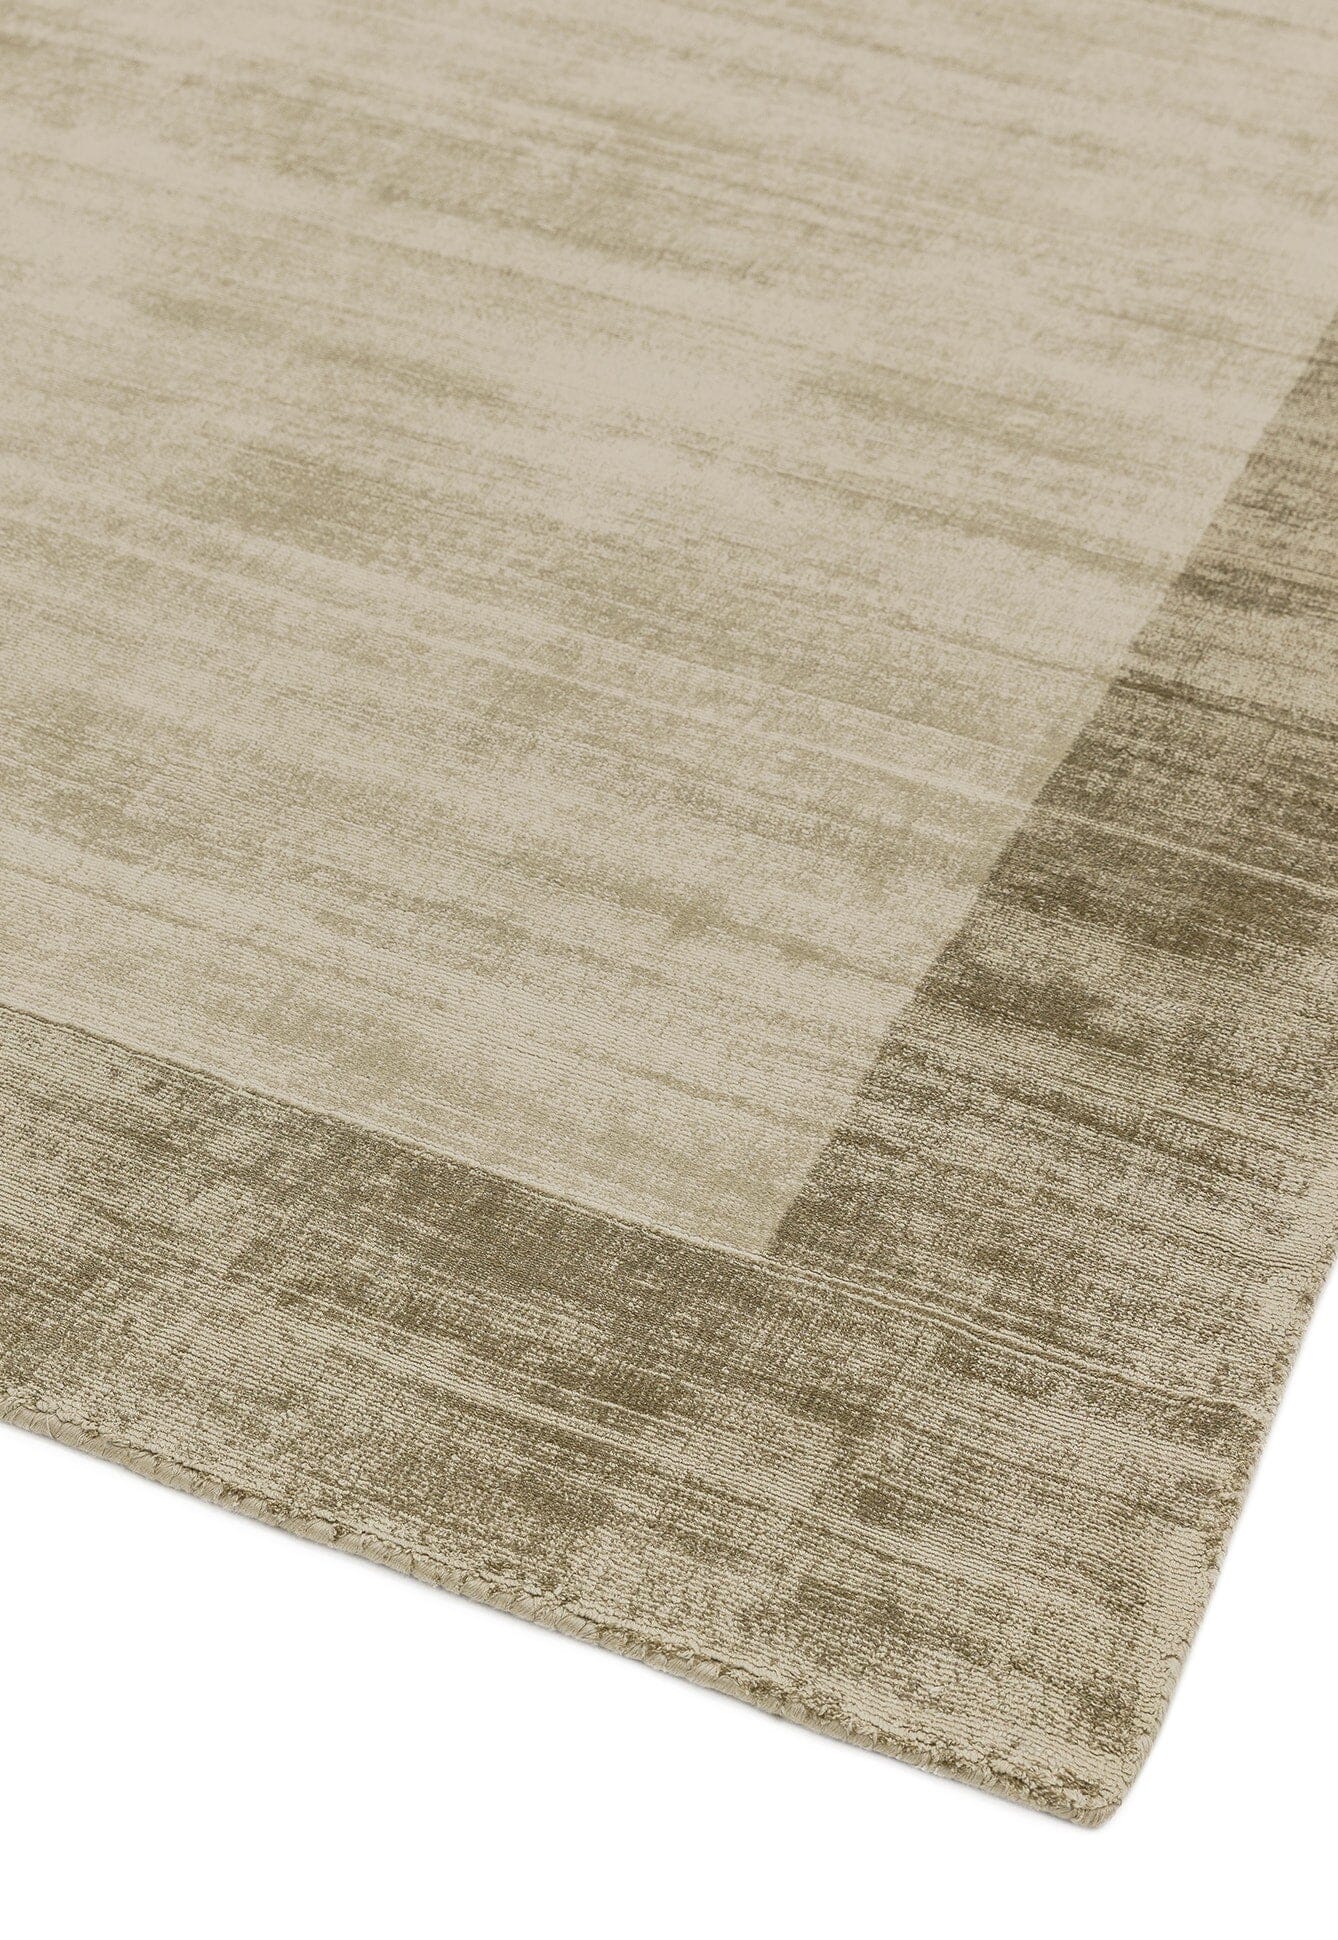 Asiatic Carpets Blade Hand Woven Rug Smoke Putty - 200 x 290cm